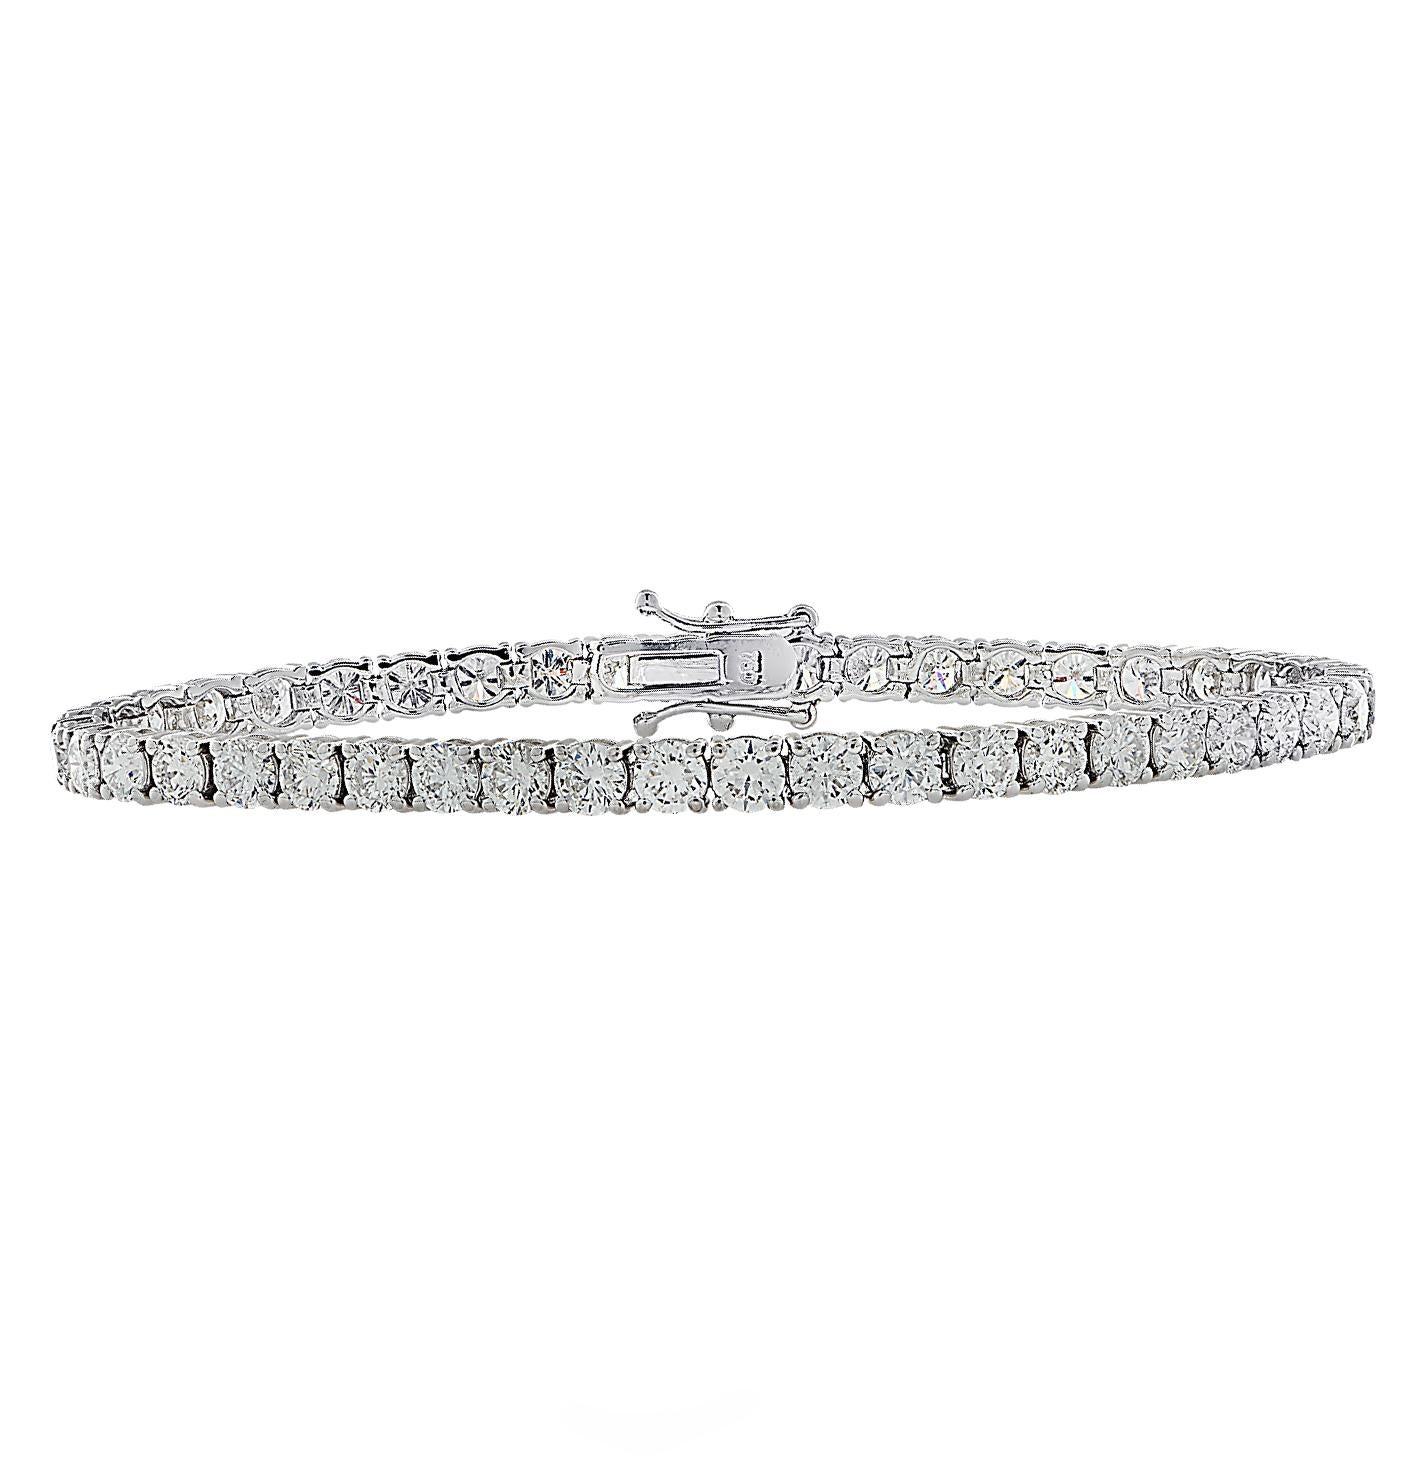 Exquisite Vivid Diamonds diamond tennis bracelet crafted in 18 karat white gold, showcasing 44 stunning round brilliant cut diamonds weighing approximately 9.8 carats total, G-H color, SI clarity. Each diamond is carefully selected, perfectly